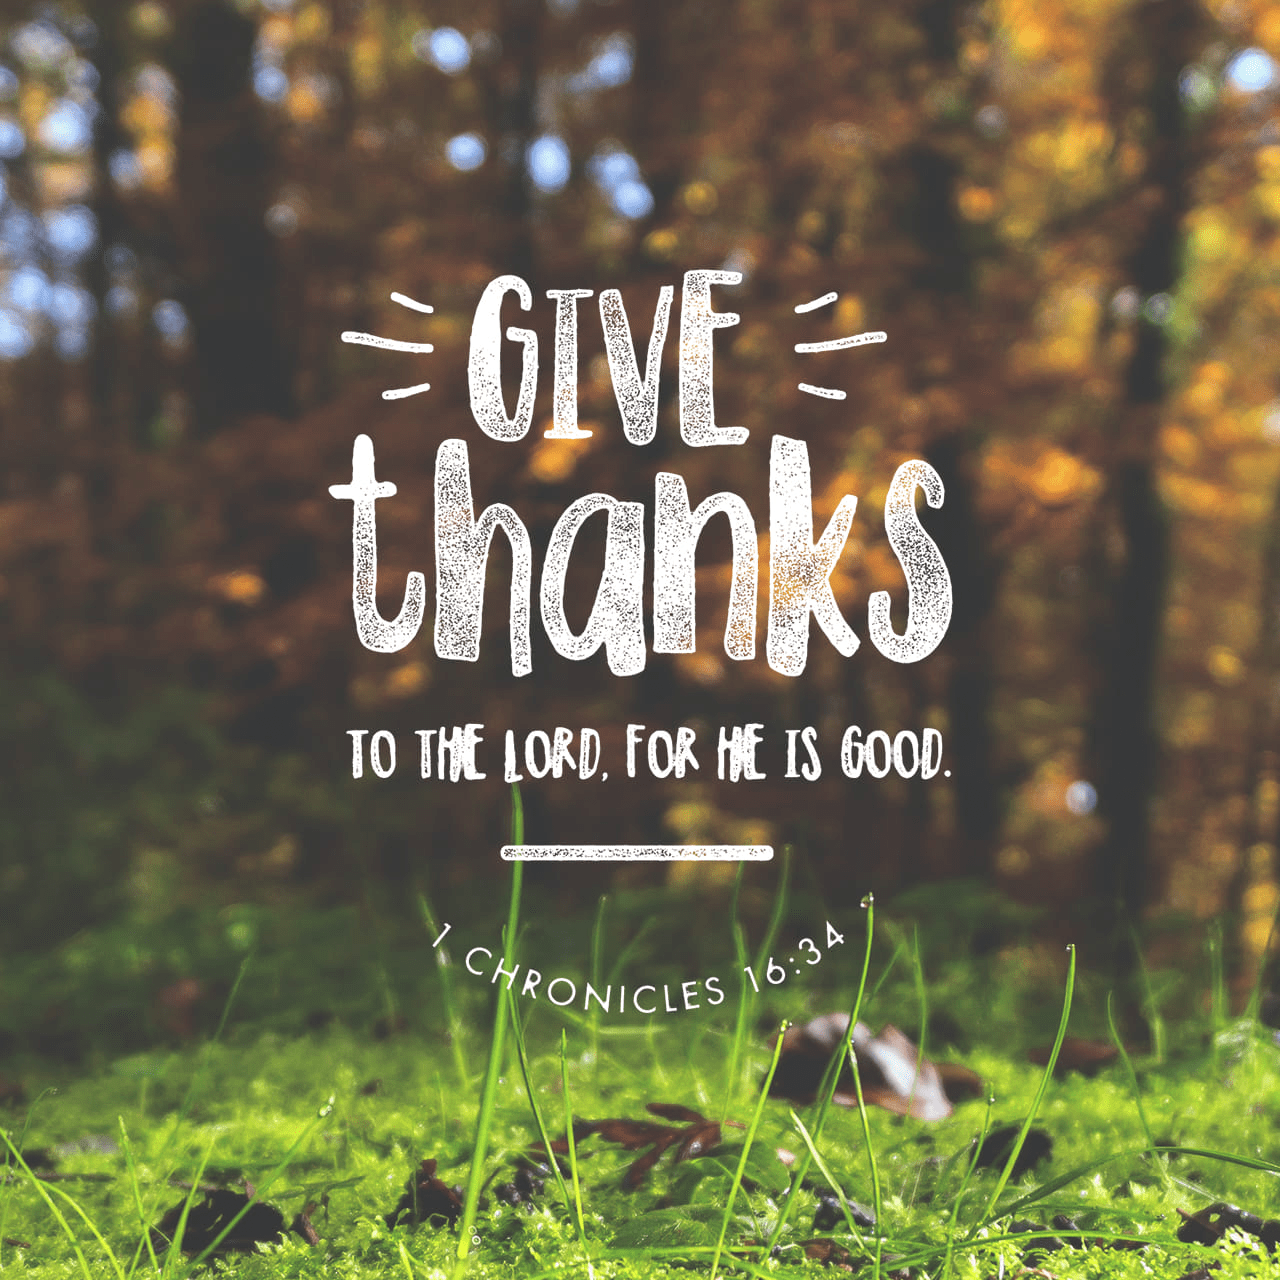 Give Thanks Bible Verse  “O give thanks to the LORD, for He is good; For His lovingkindness is everlasting.”  ‭‭1 Chronicles‬ ‭16:34‬ ‭NASB‬‬